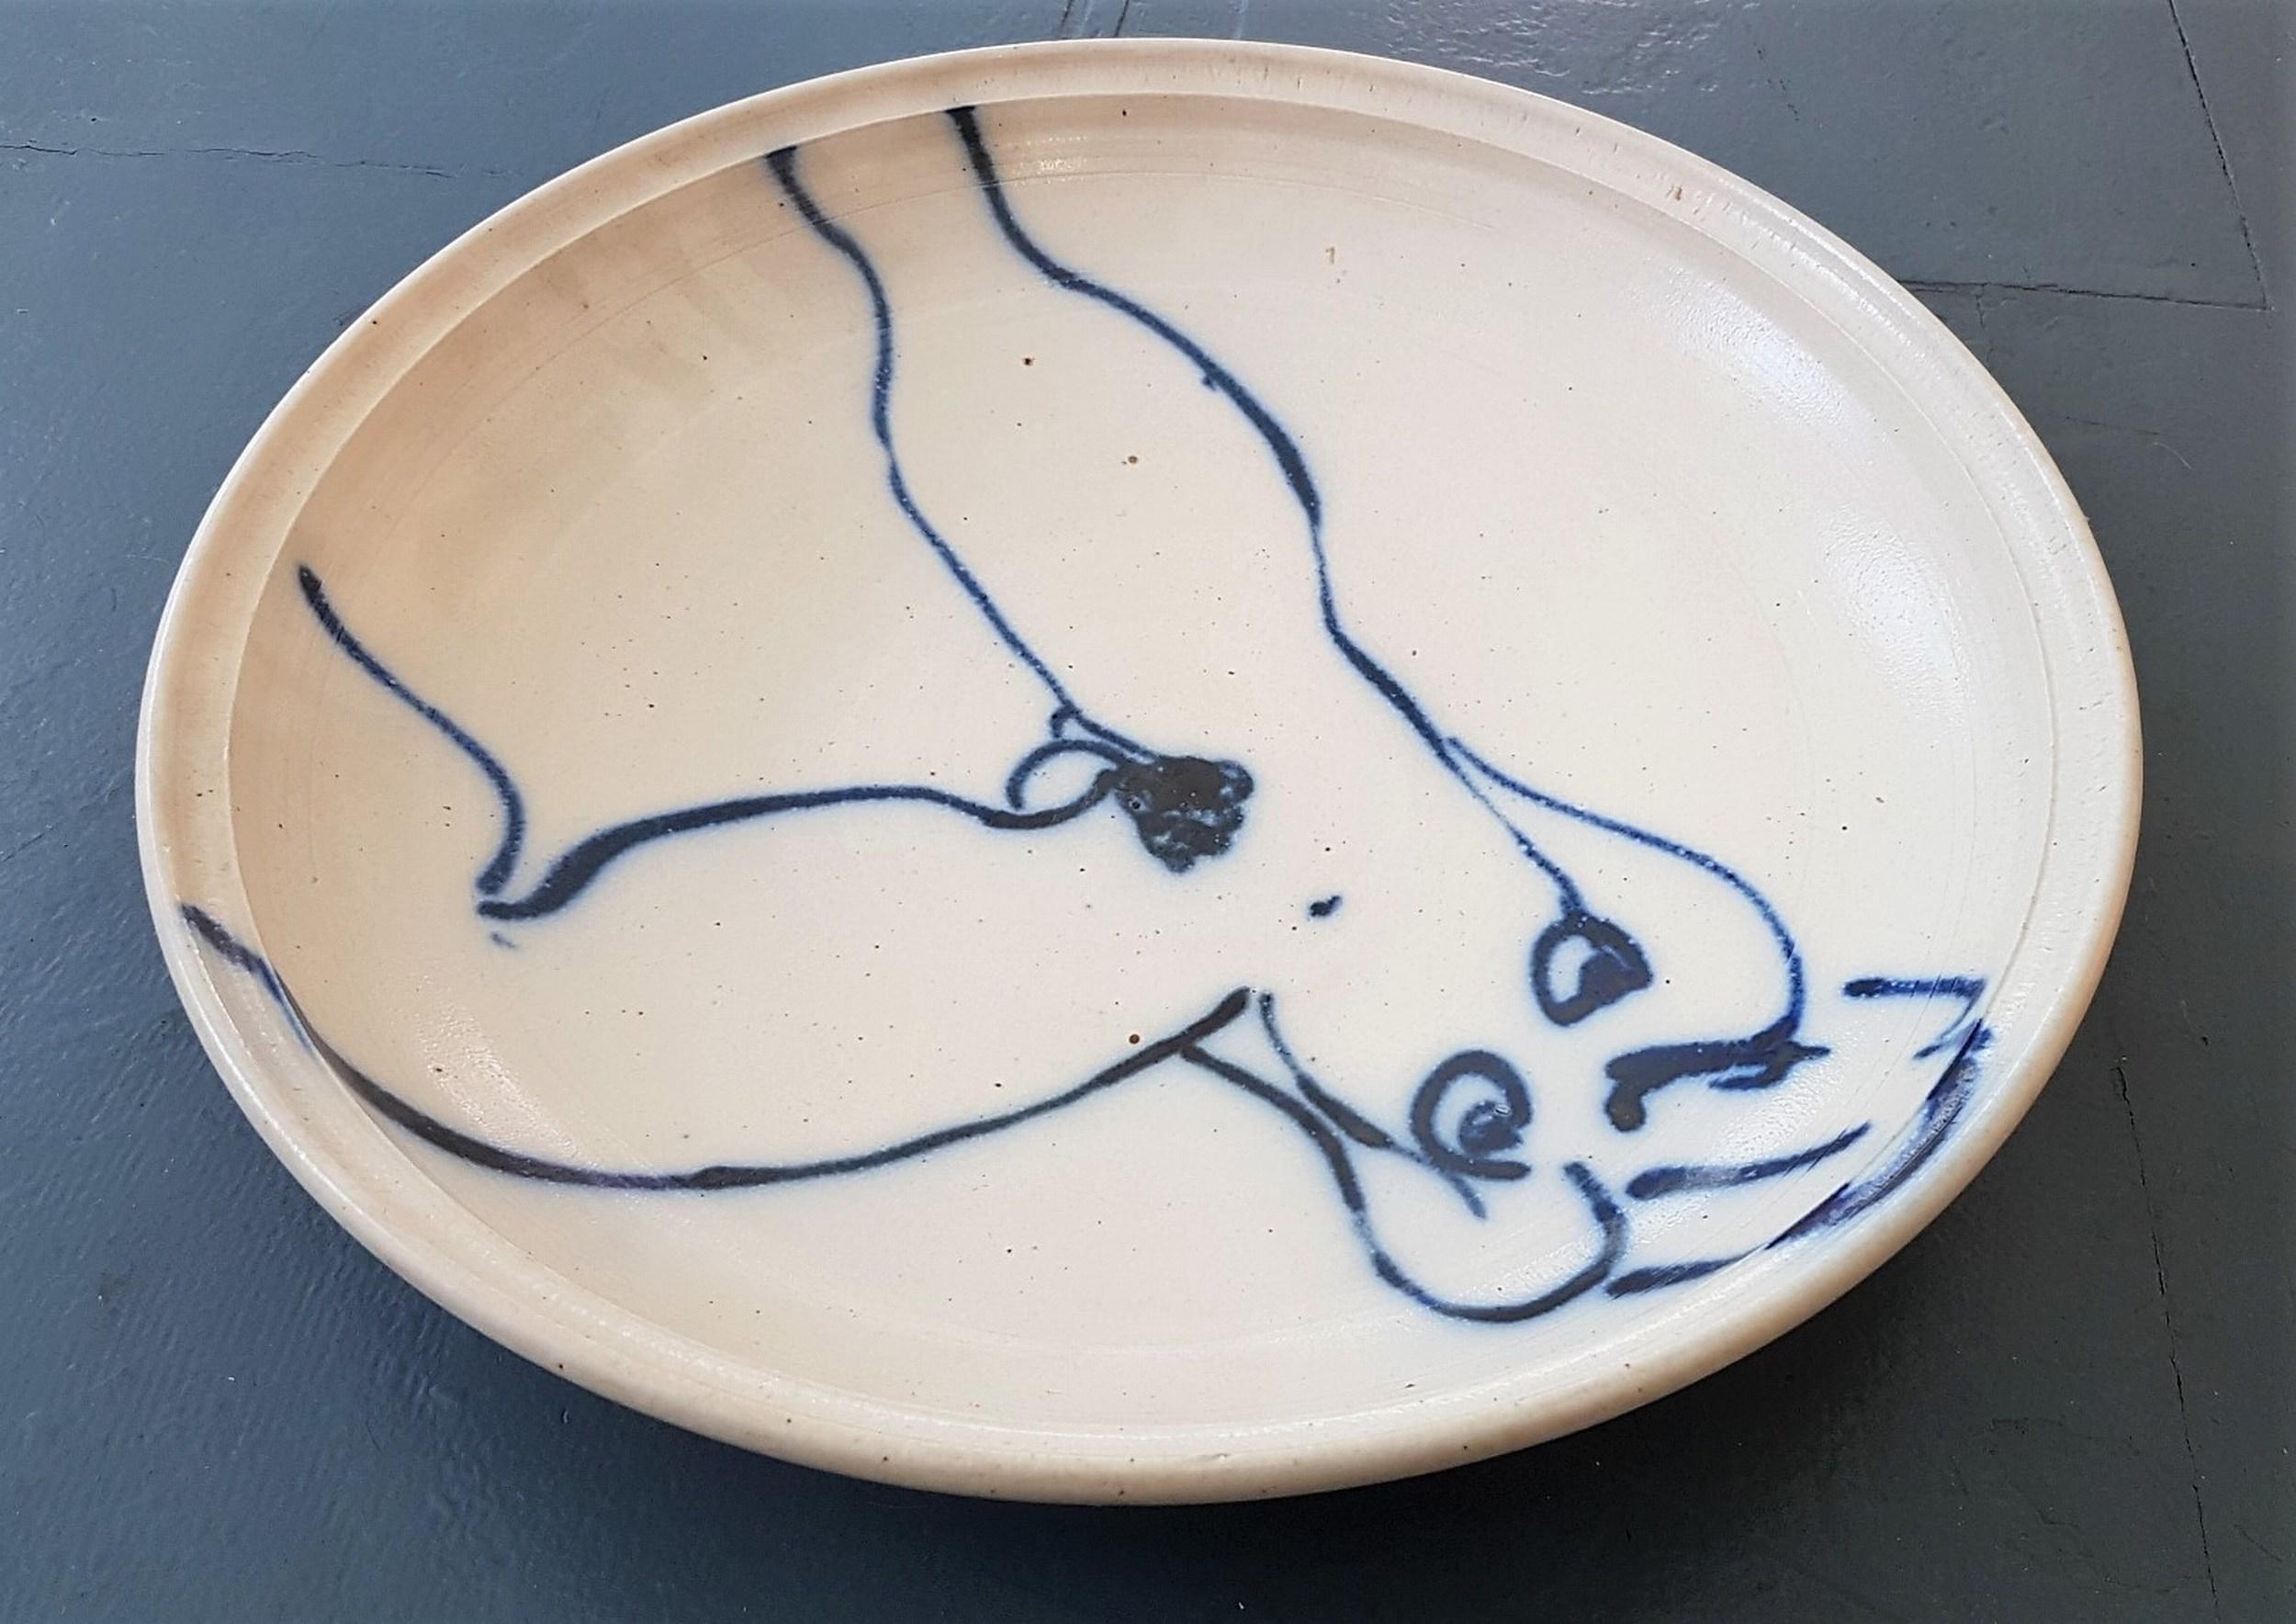 Ken Ferguson
Large Bowl with Nude
Wheel-thrown, salt-glazed stoneware
Year: Unknown
Size: 17.75 x 3 inches
Signed/Stamped
COA provided

Kenneth Richard Ferguson was born in 1928 in Elwood, Indiana. He received a Bachedlor of Fine Arts degree in